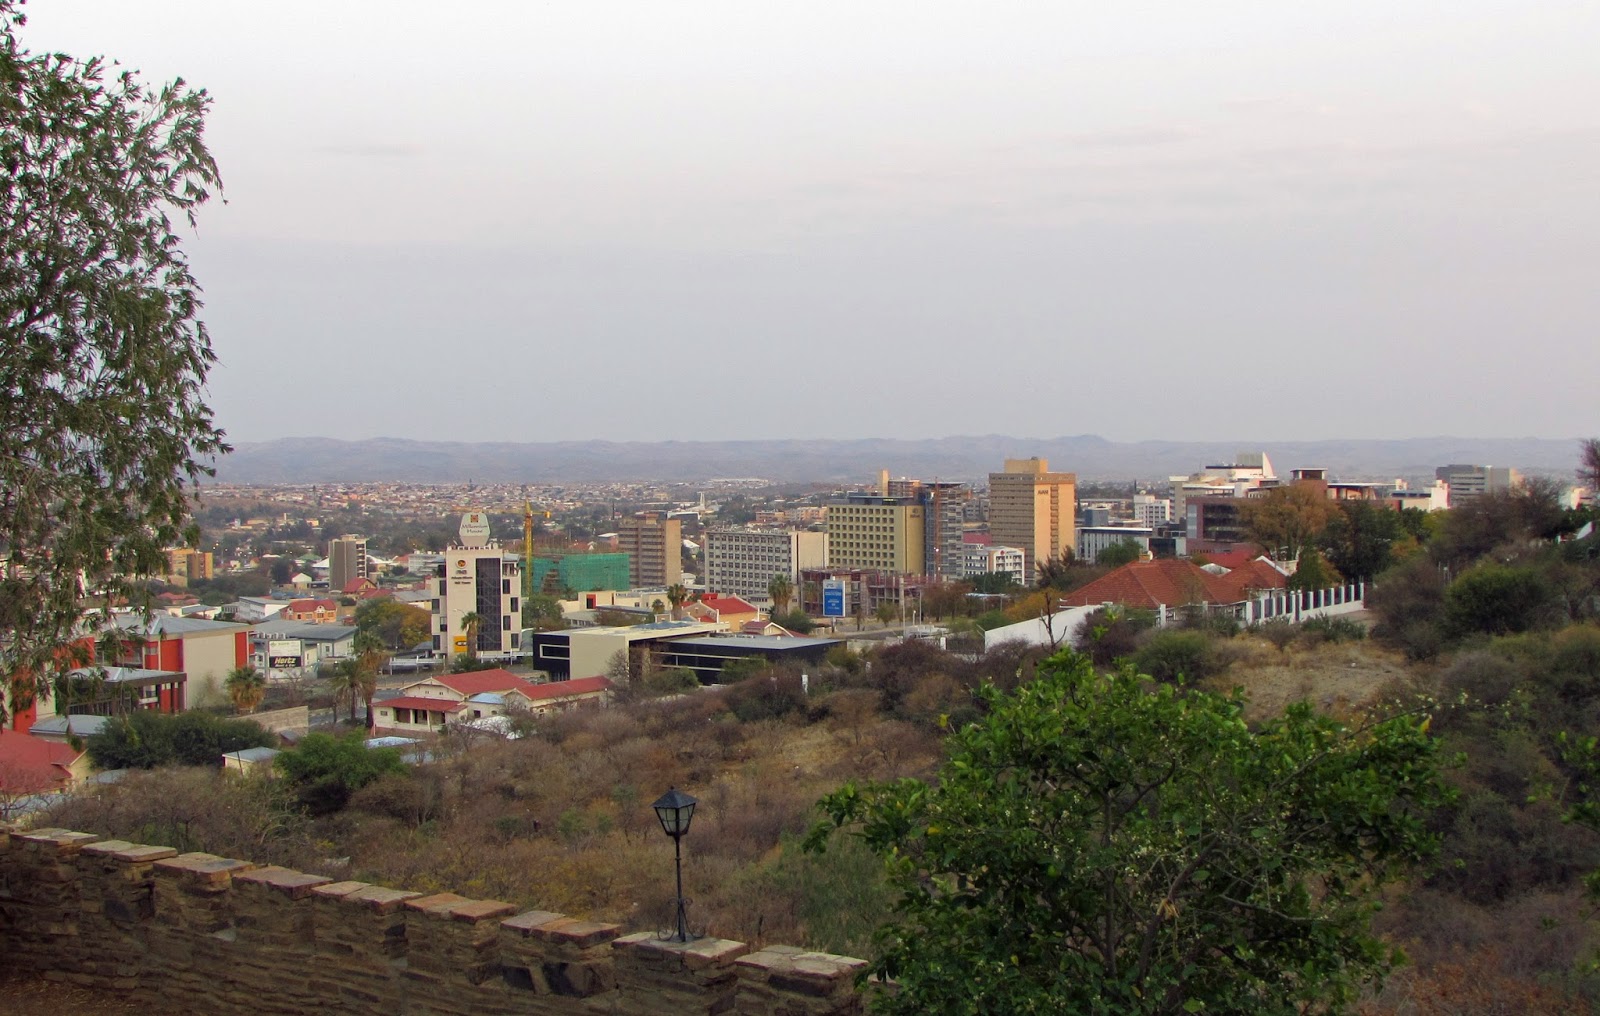 To Travel is to Live: Windhoek